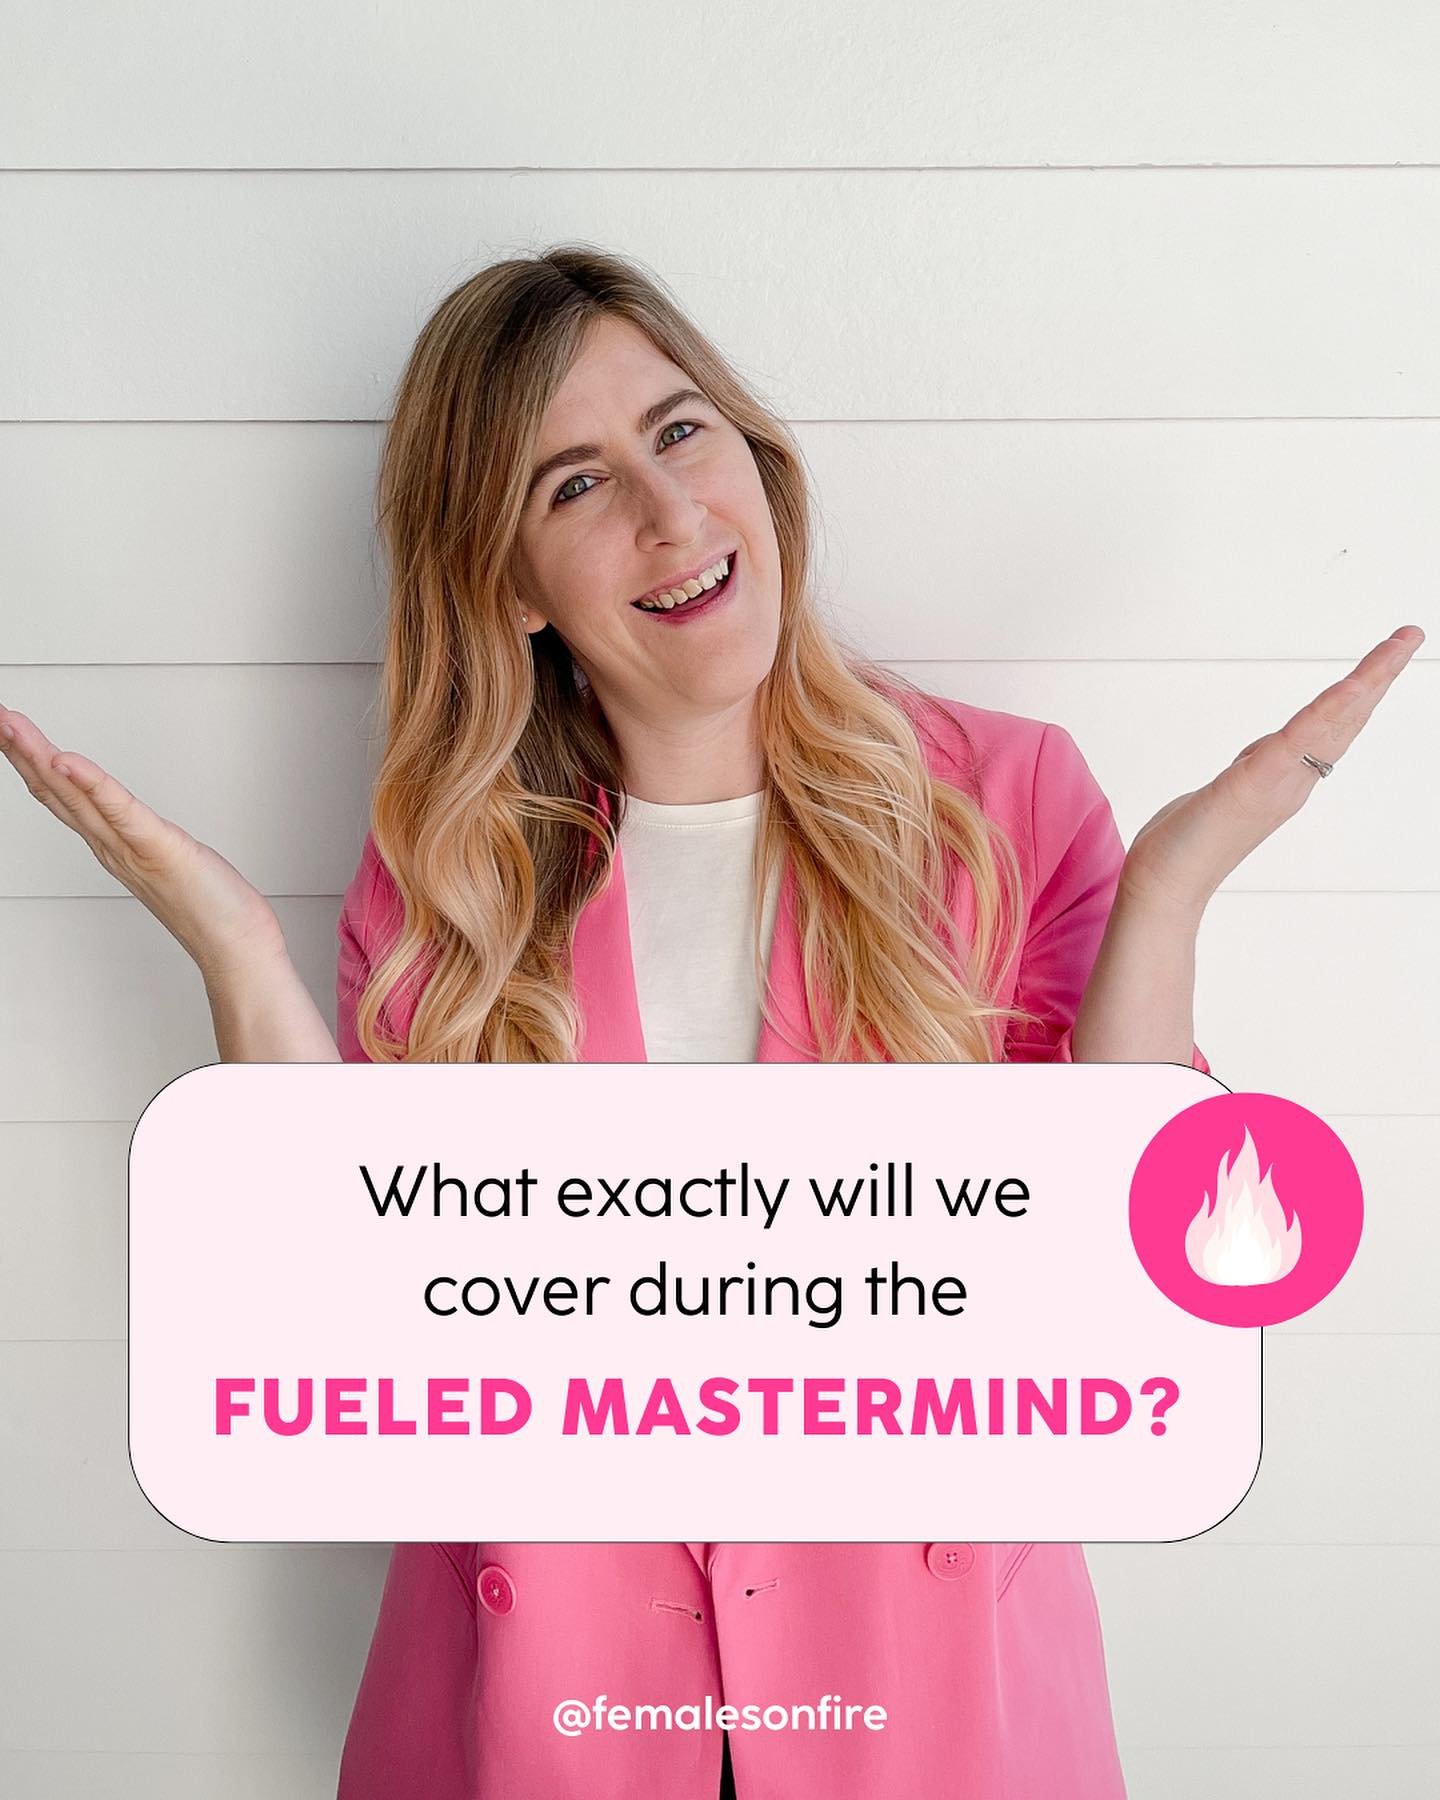 Sure, the FUELED Mastermind is all about building your community, but what does that mean and what will we actually cover over the next 6 months?

Swipe through to see all the details of the FUELED method that we&rsquo;ll focus on to help you build, 